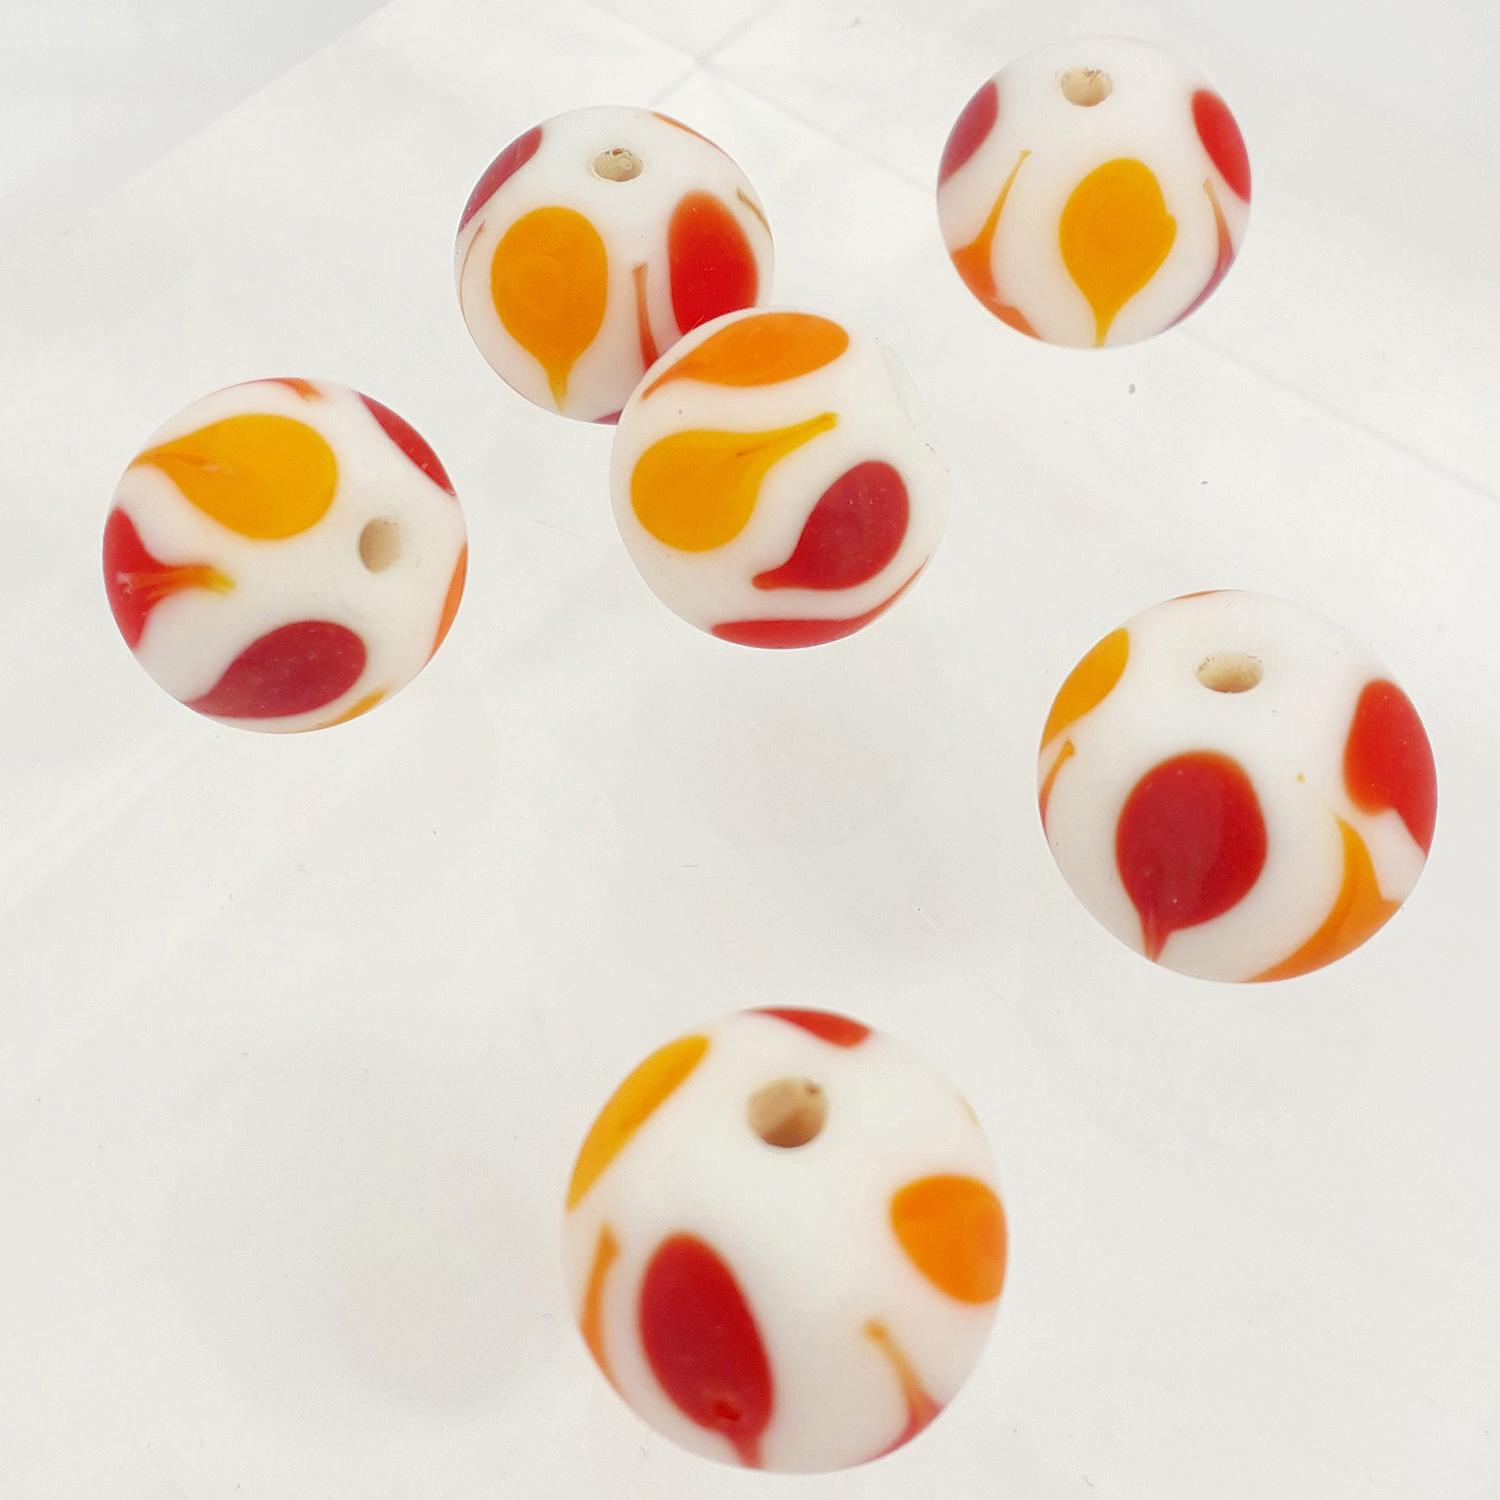 14mm Matte White Glass Round Bead with Matte Orange and Red Teardrops Design